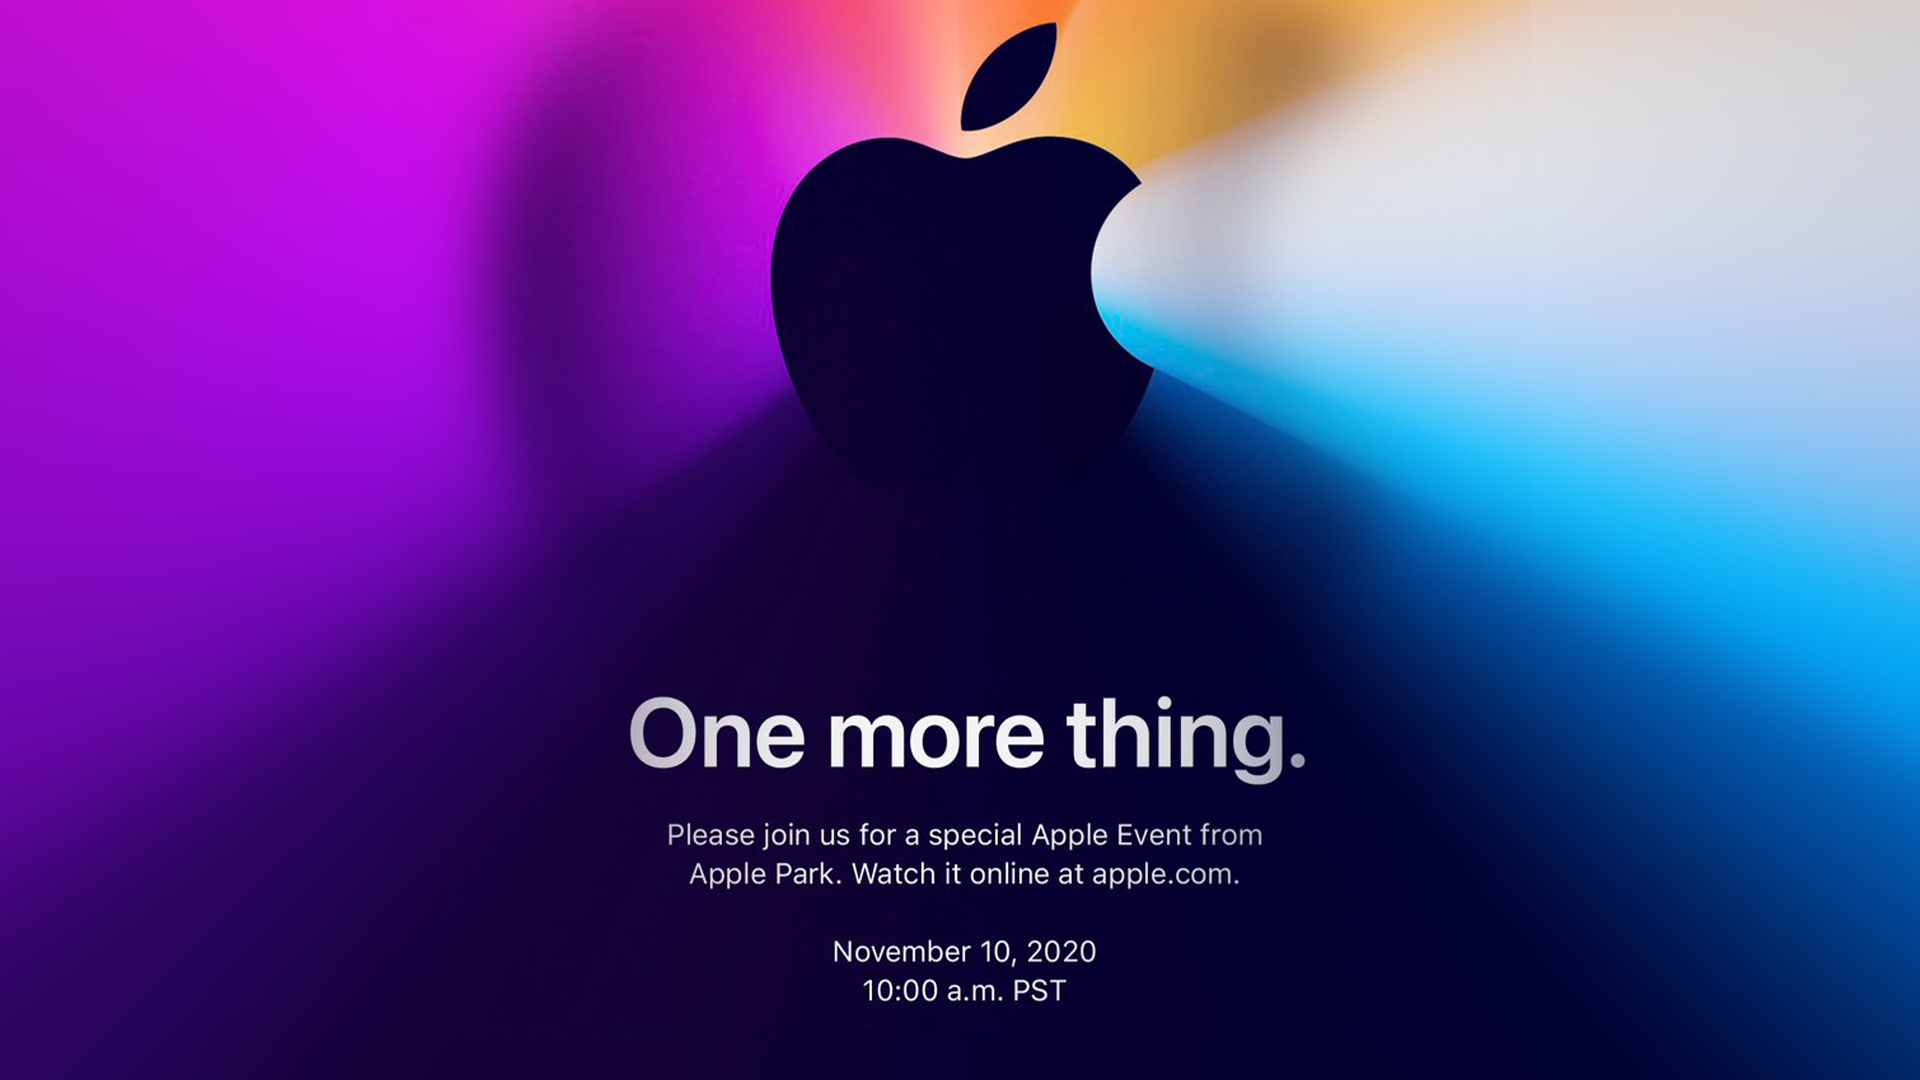 How To Watch The Apple One More Thing Event See The New Macbooks Here Techradar